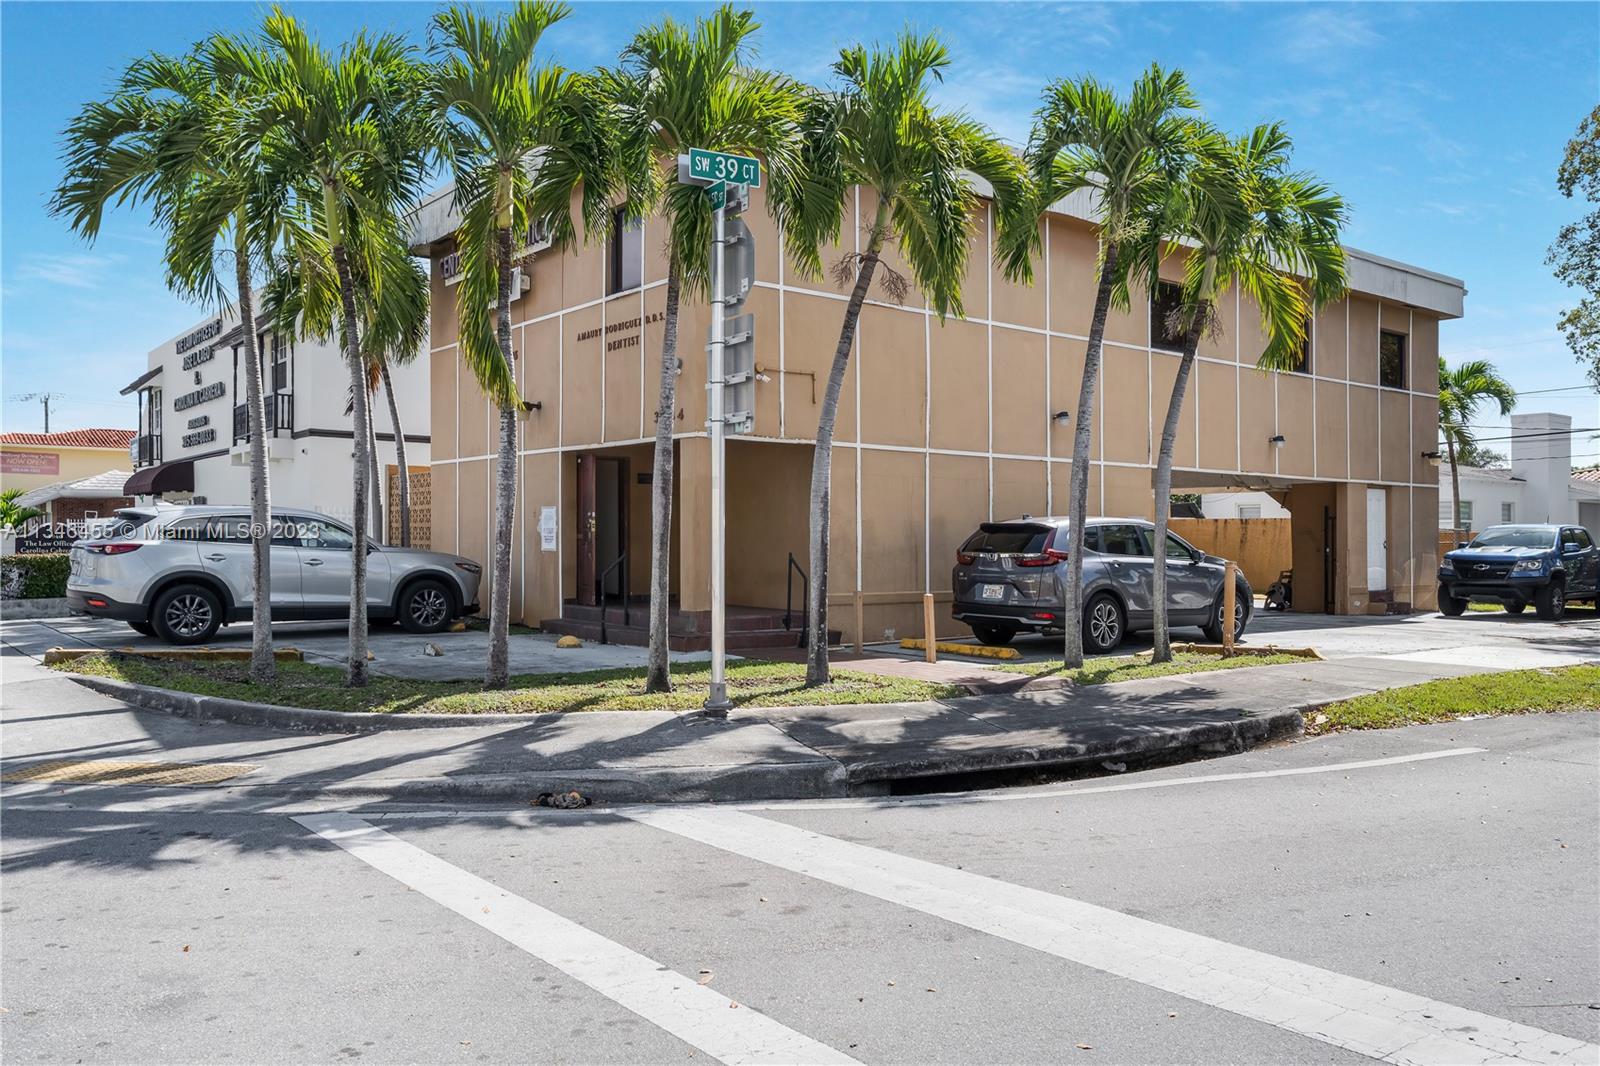 Splendid Dental Office Building is located in the Miami Central Business district near Miami Airport, Coral Gables, Downtown Miami, and many retail amenities.  This 2 story office bldg is currently operating as a Dental Office that offers Reception area/Lobby, Kitchen, Patient & private bathrms, Client Files Storage rm, Dental Laboratory rm, XRay/Development rm, 3 Dental completely plumbed ready patient rms, 10 covered & open parking spaces on premises, & more.  Roof-2013, A/C-2022, complete security/camera system (interior/exterior). Sale includes all office furnishings, all dental equipment/inventory, 50+ year dental client base.  Office location has Flagler St traffic w/ thousands of vehicular daily traffic. Ideal location for legal,financial, insurance & many other businesses.